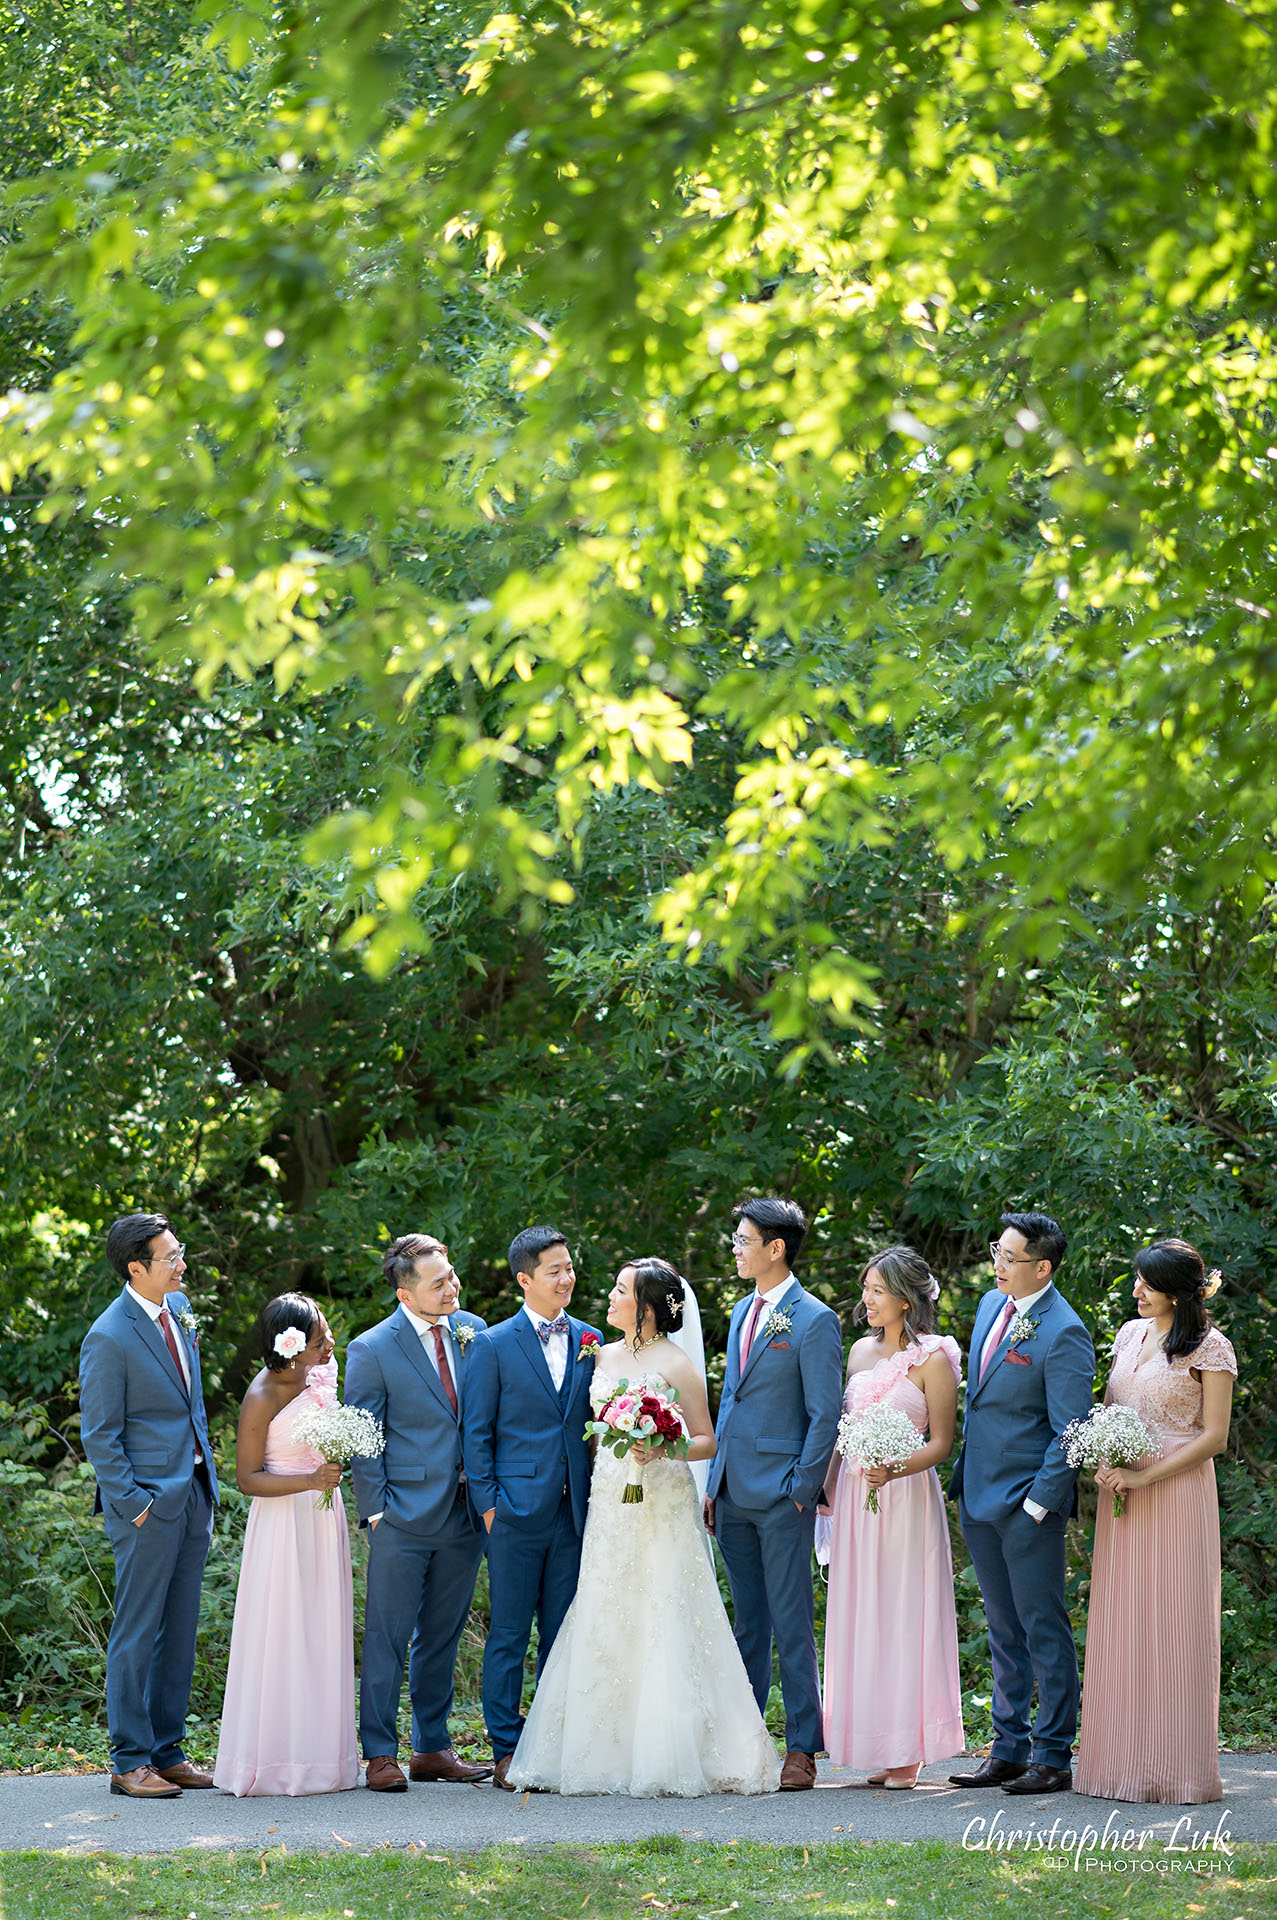 Christopher Luk Toronto Wedding Photographer Bridle Trail Baptist Church Unionville Main Street Crystal Fountain Event Venue Bride Groom Natural Photojournalistic Candid Creative Portrait Session Pictures Bridal Party Best Man Groomsmen Maid of Honour Bridesmaids Forest Vertical Portrait 